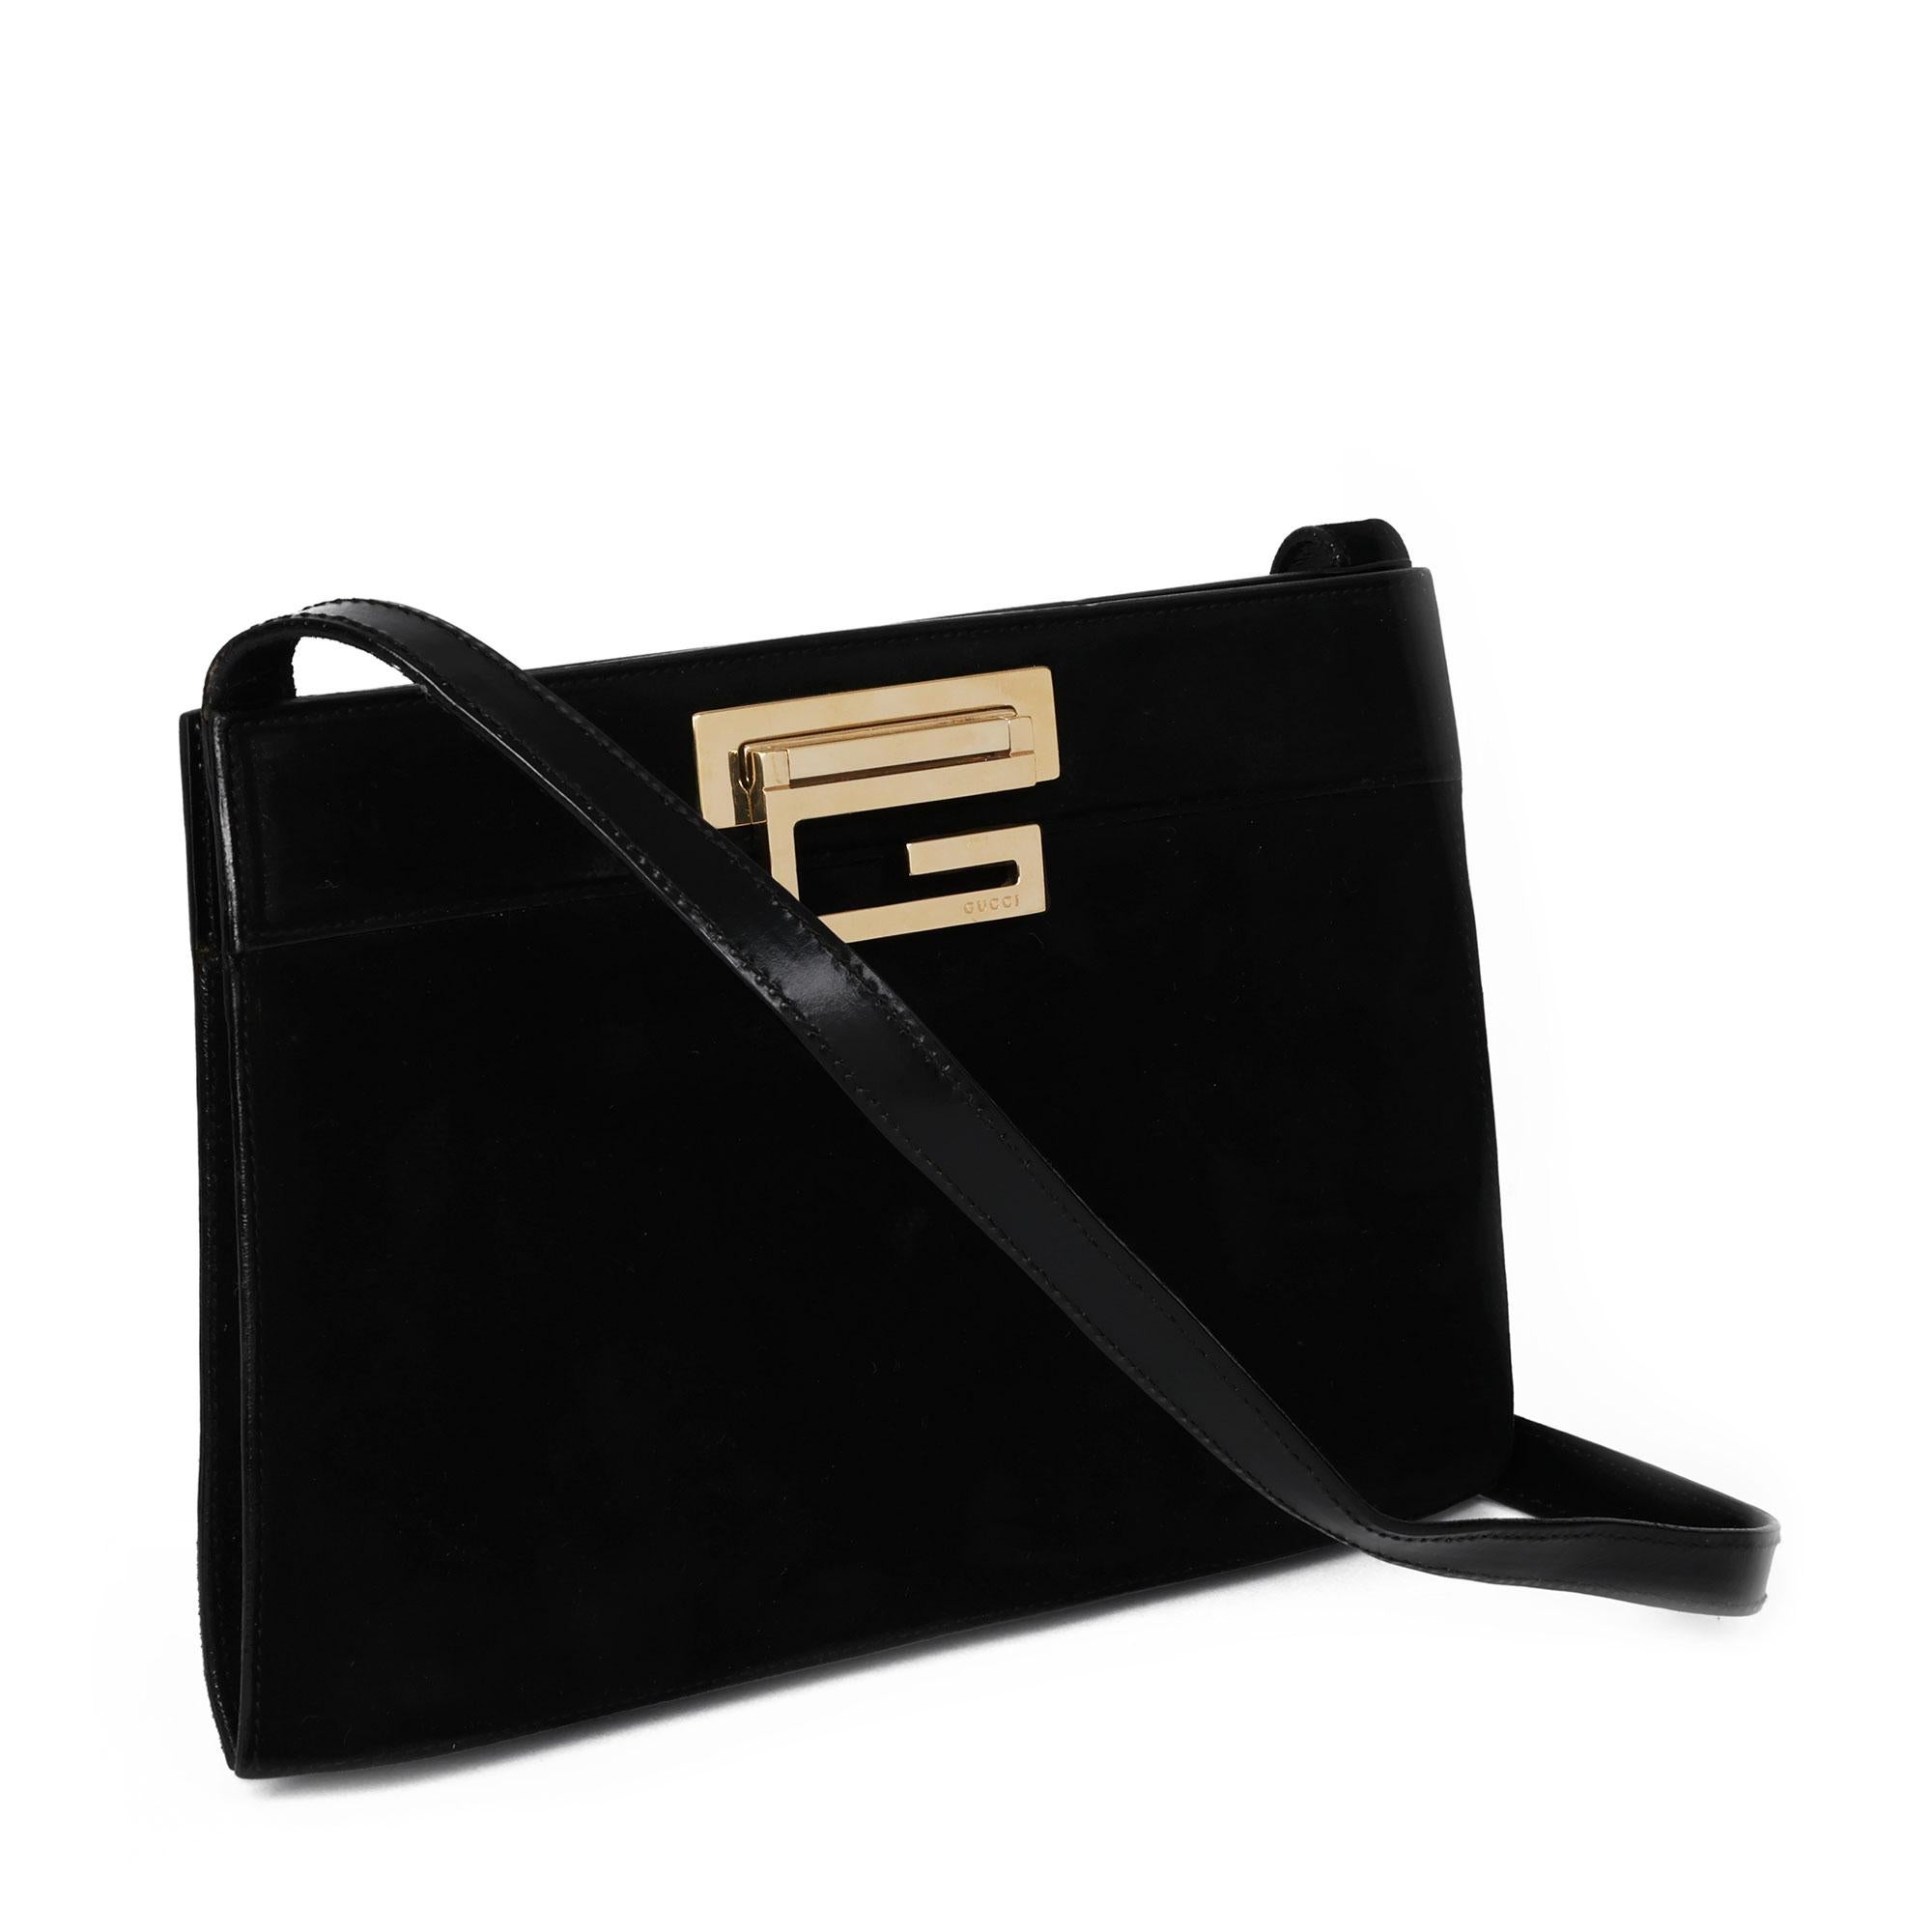 GUCCI
Black Suede Vintage Frame Shoulder Bag

Xupes Reference: CWAHF-HB007
Serial Number: 001-1781-1864
Age (Circa): 1990
Authenticity Details: Date Stamp (Made in Italy)
Gender: Ladies
Type: Shoulder

Colour: Black
Hardware: Gold
Material(s):